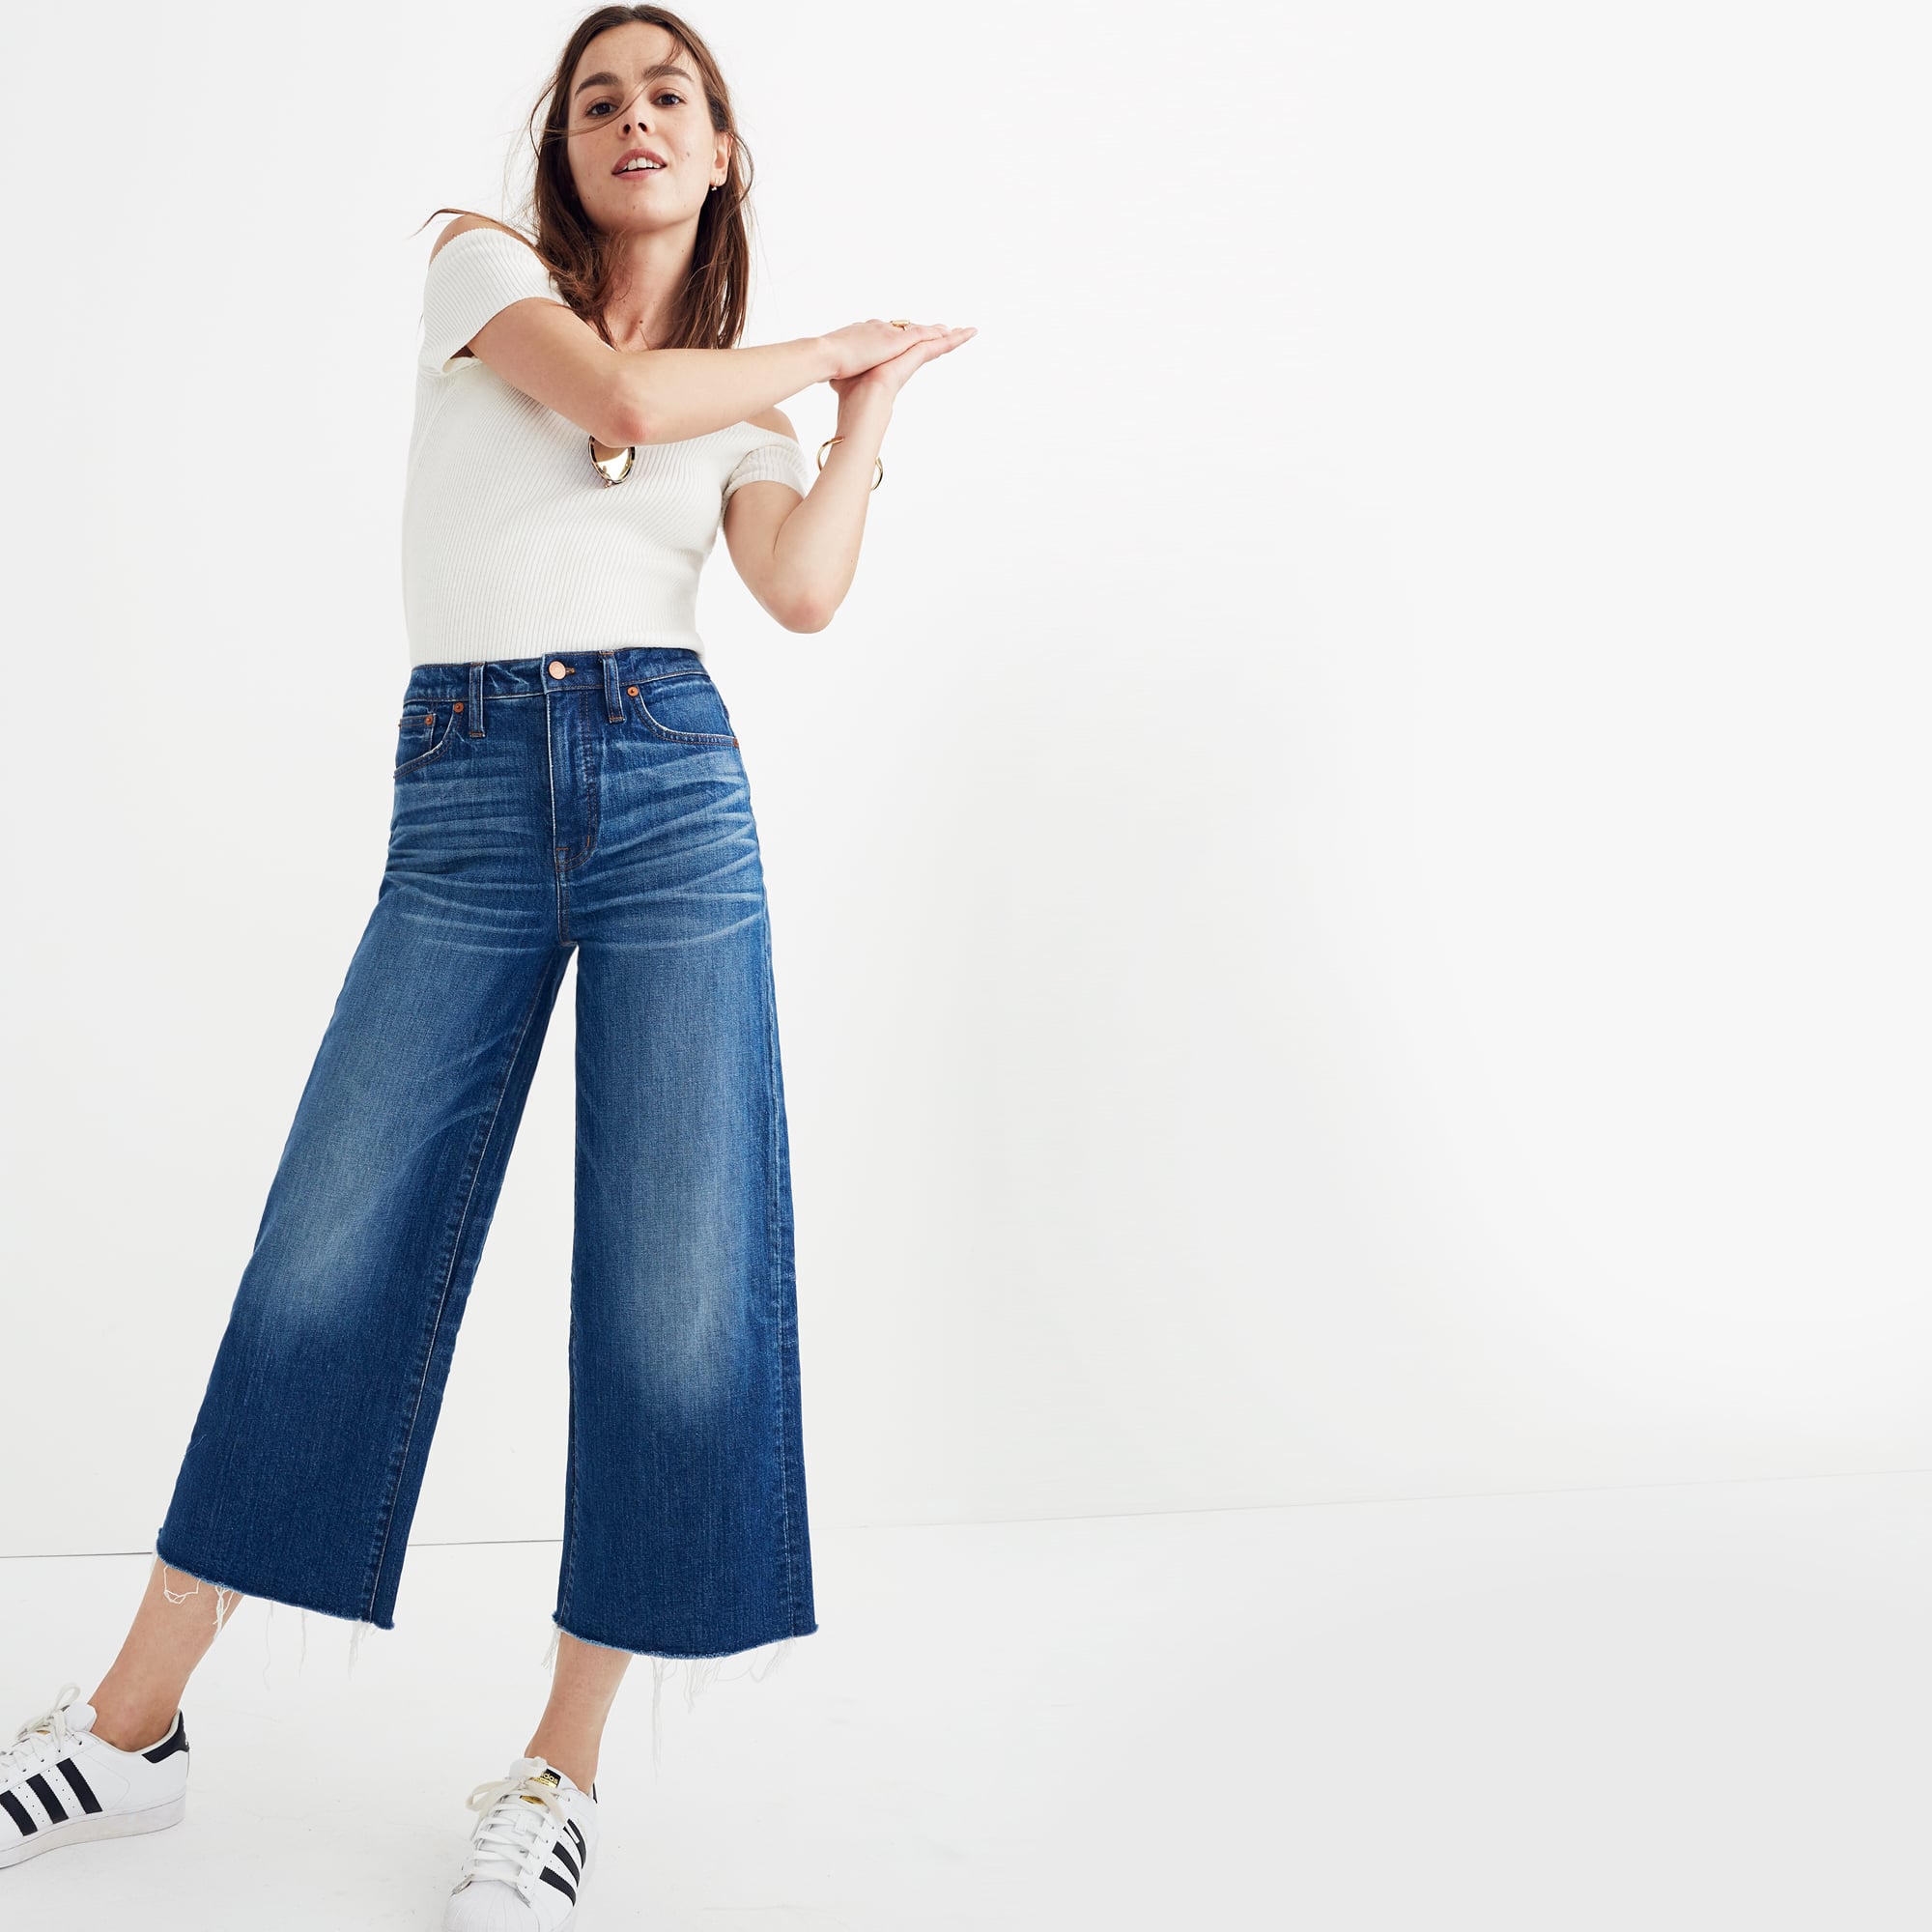 Madewell Jeans Sizing: A Guide to Madewell's Latest Denim 